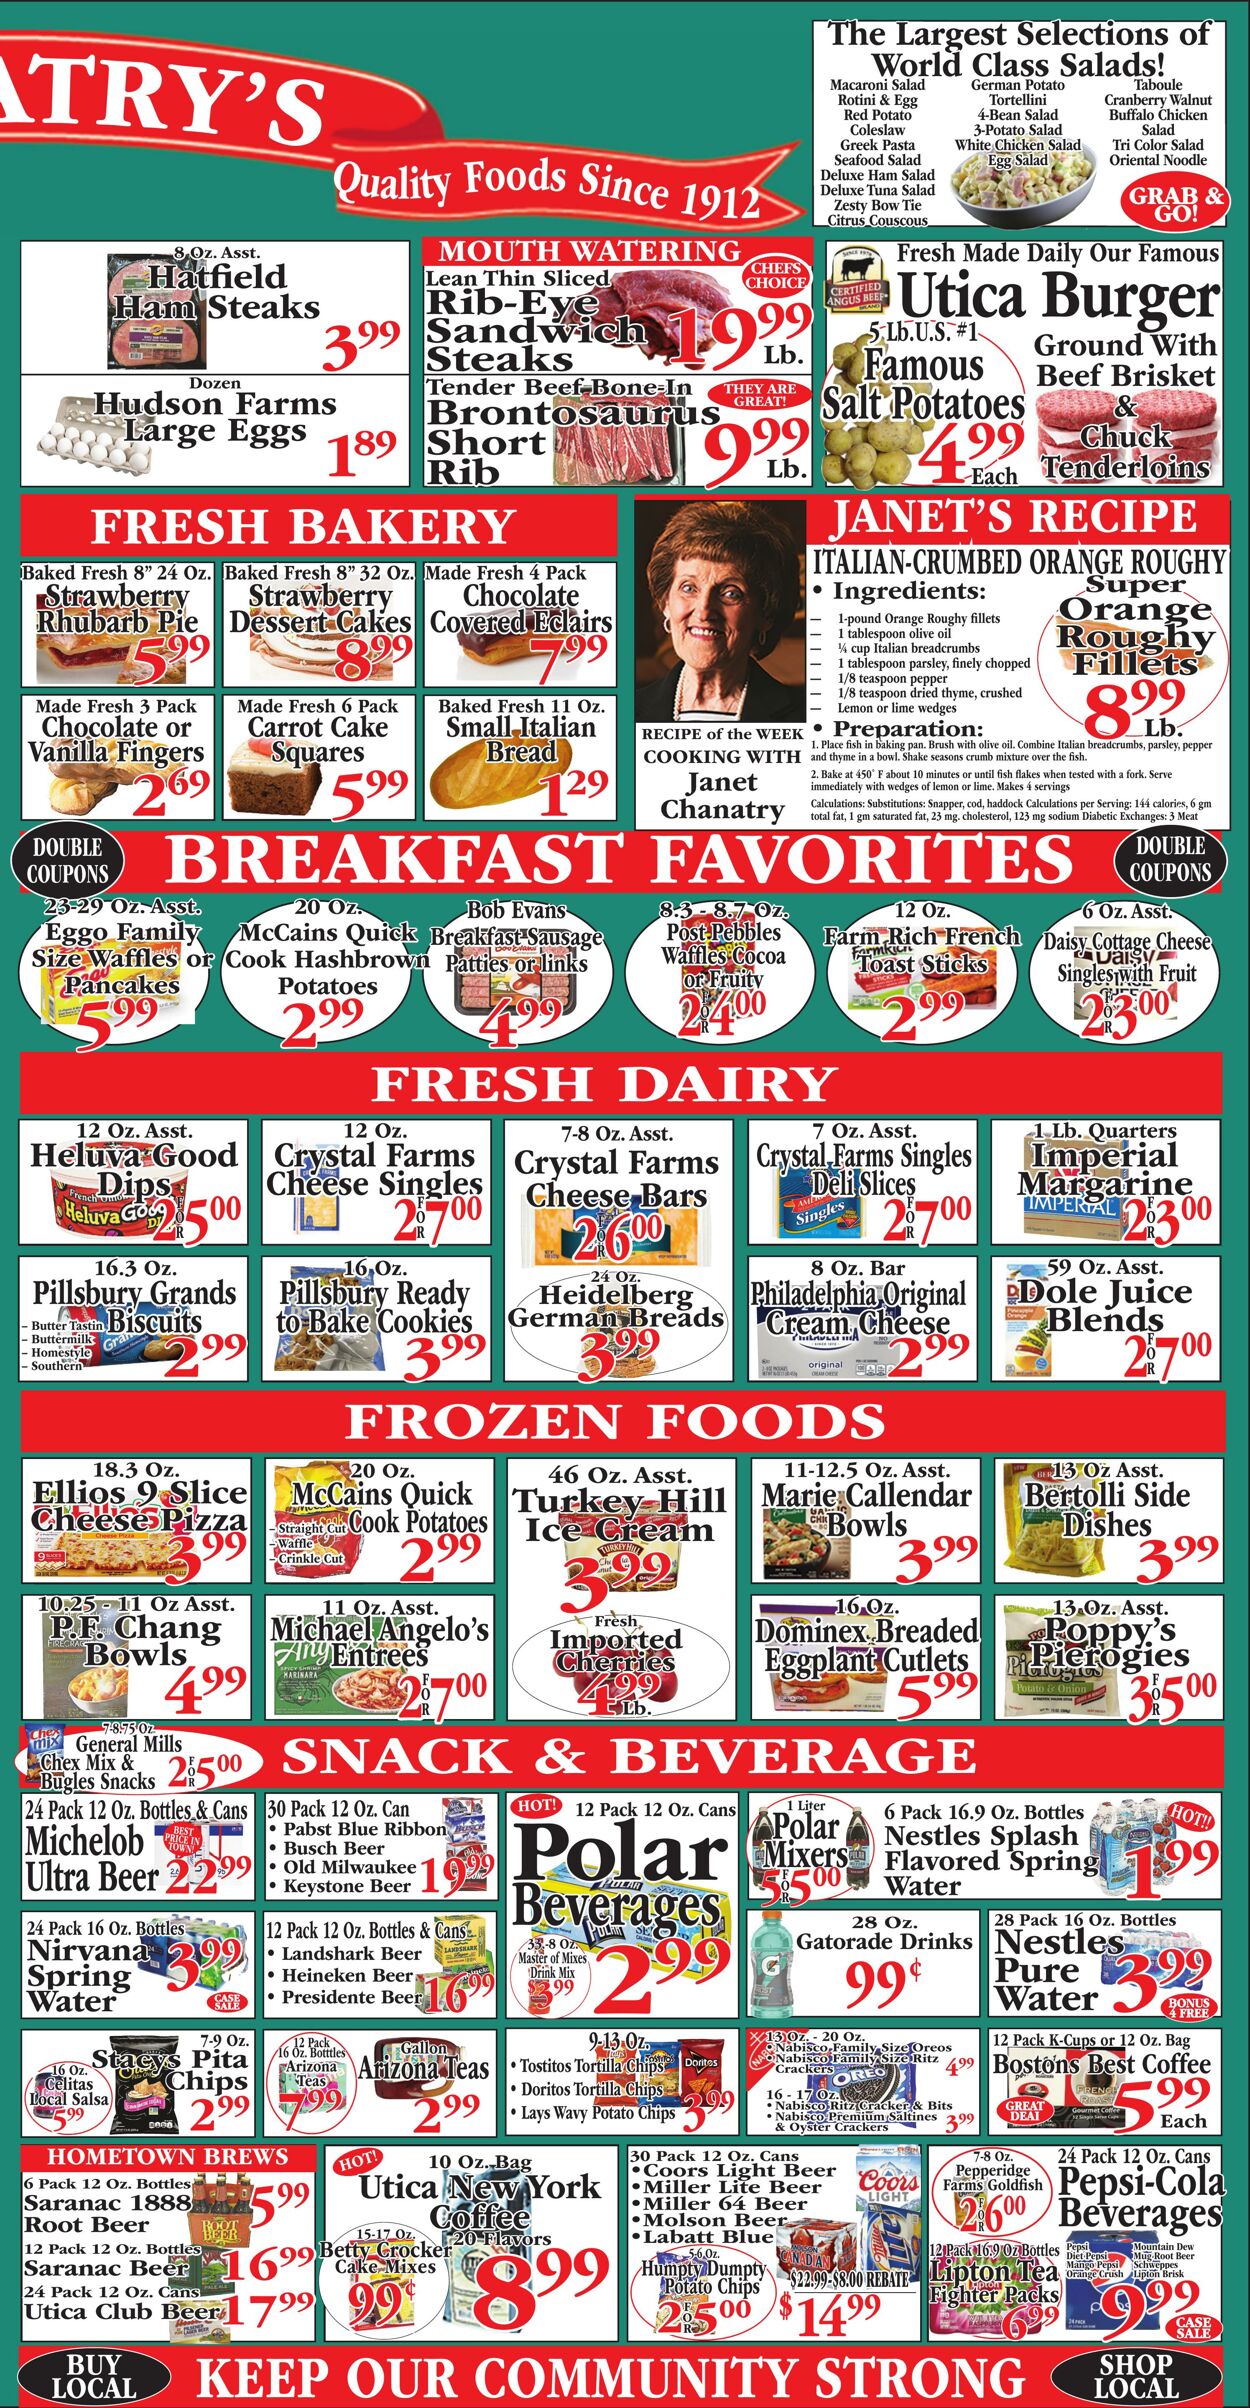 Weekly ad Chanatry's Hometown Market 01/21/2024 - 01/27/2024